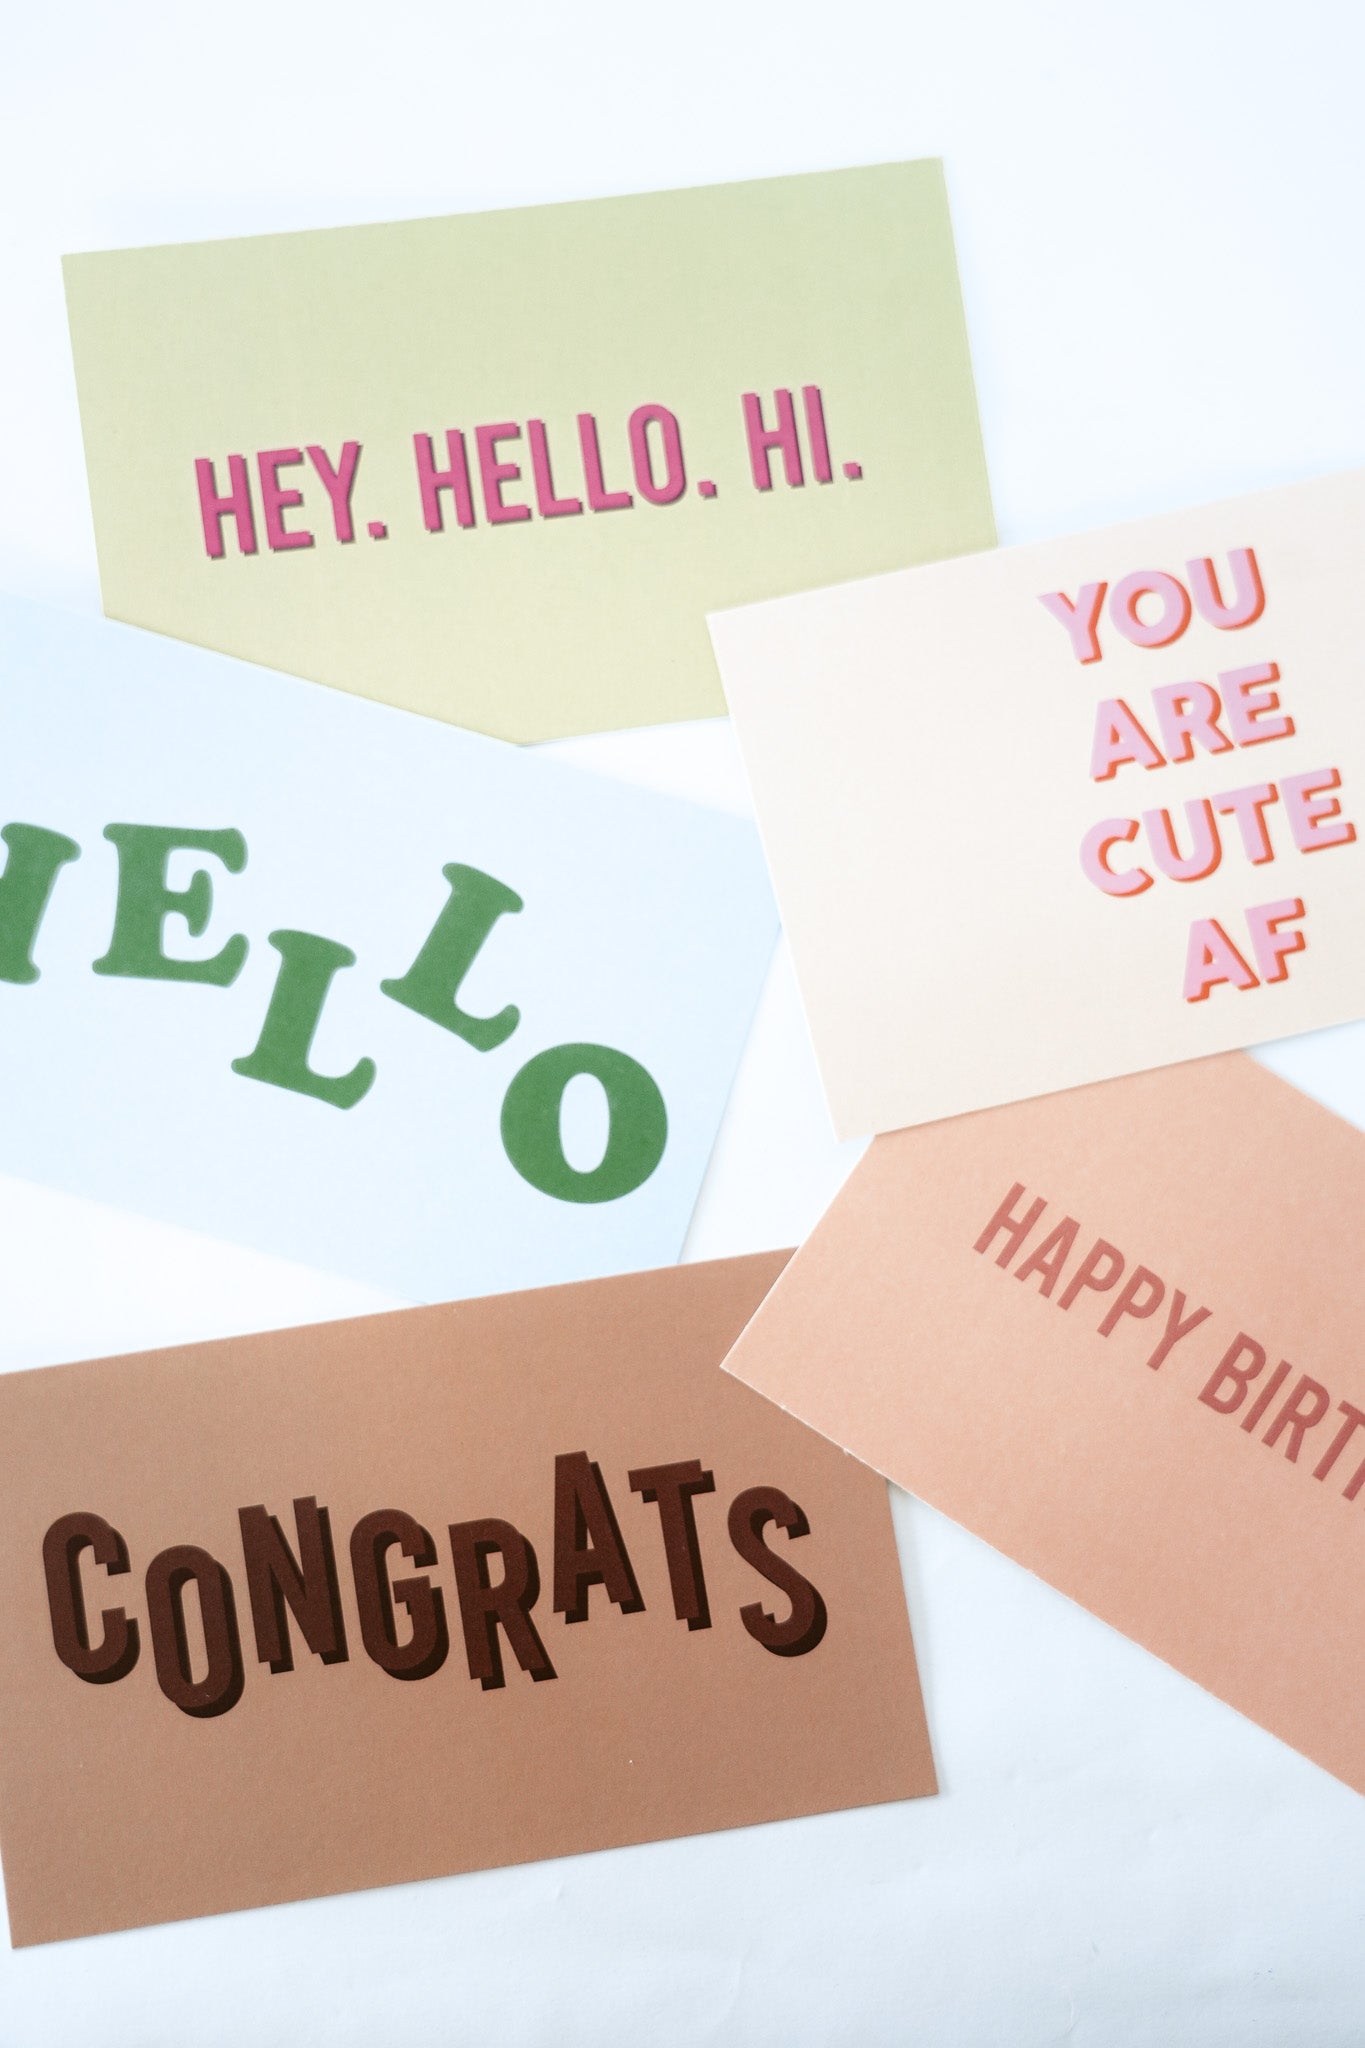 NOTE GREETING CARD - YOU ARE CUTE AF